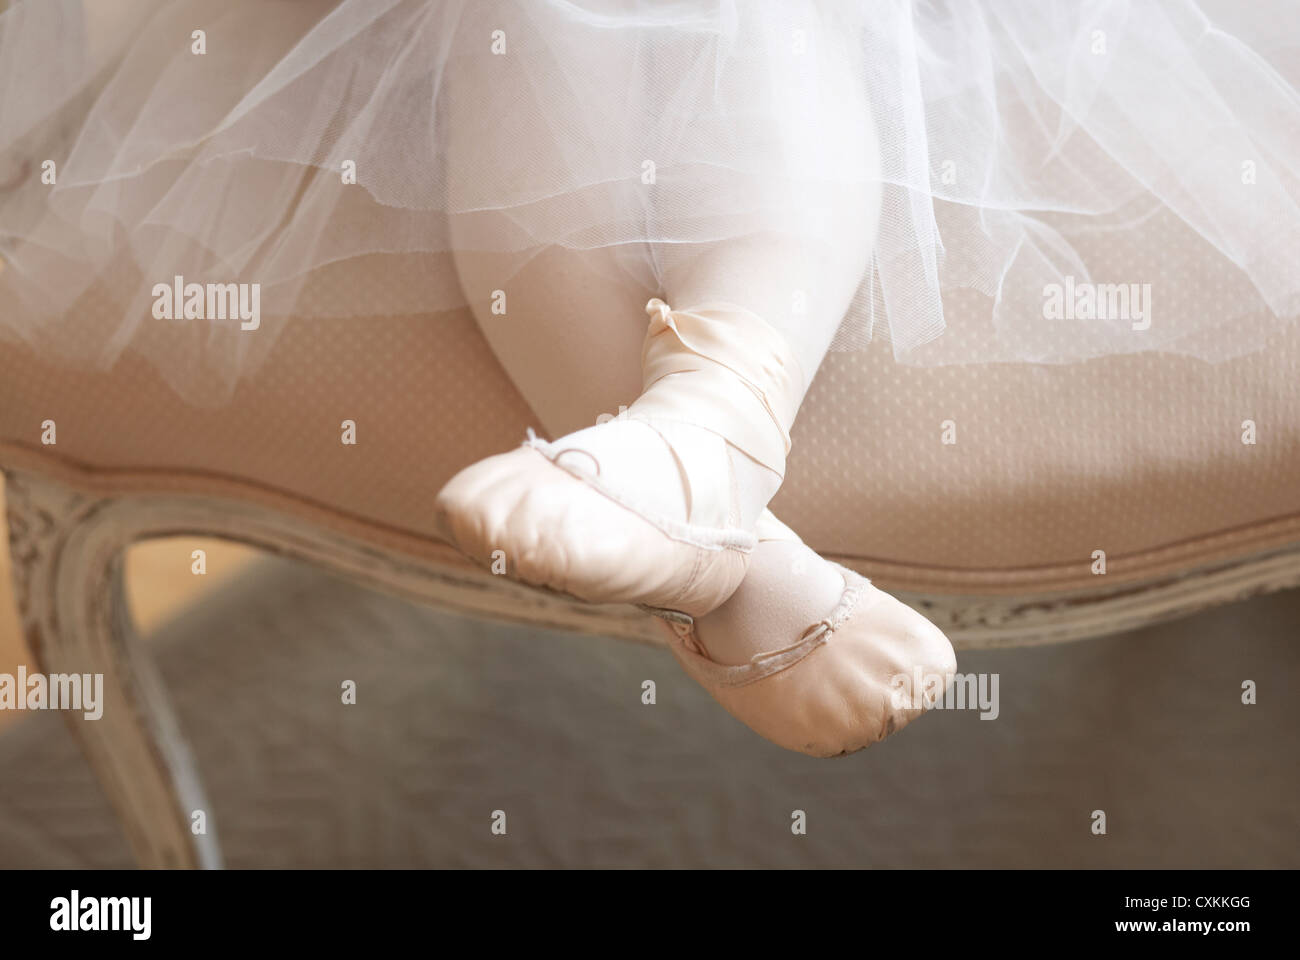 girl in tutu and ballet shoes in a chair Stock Photo